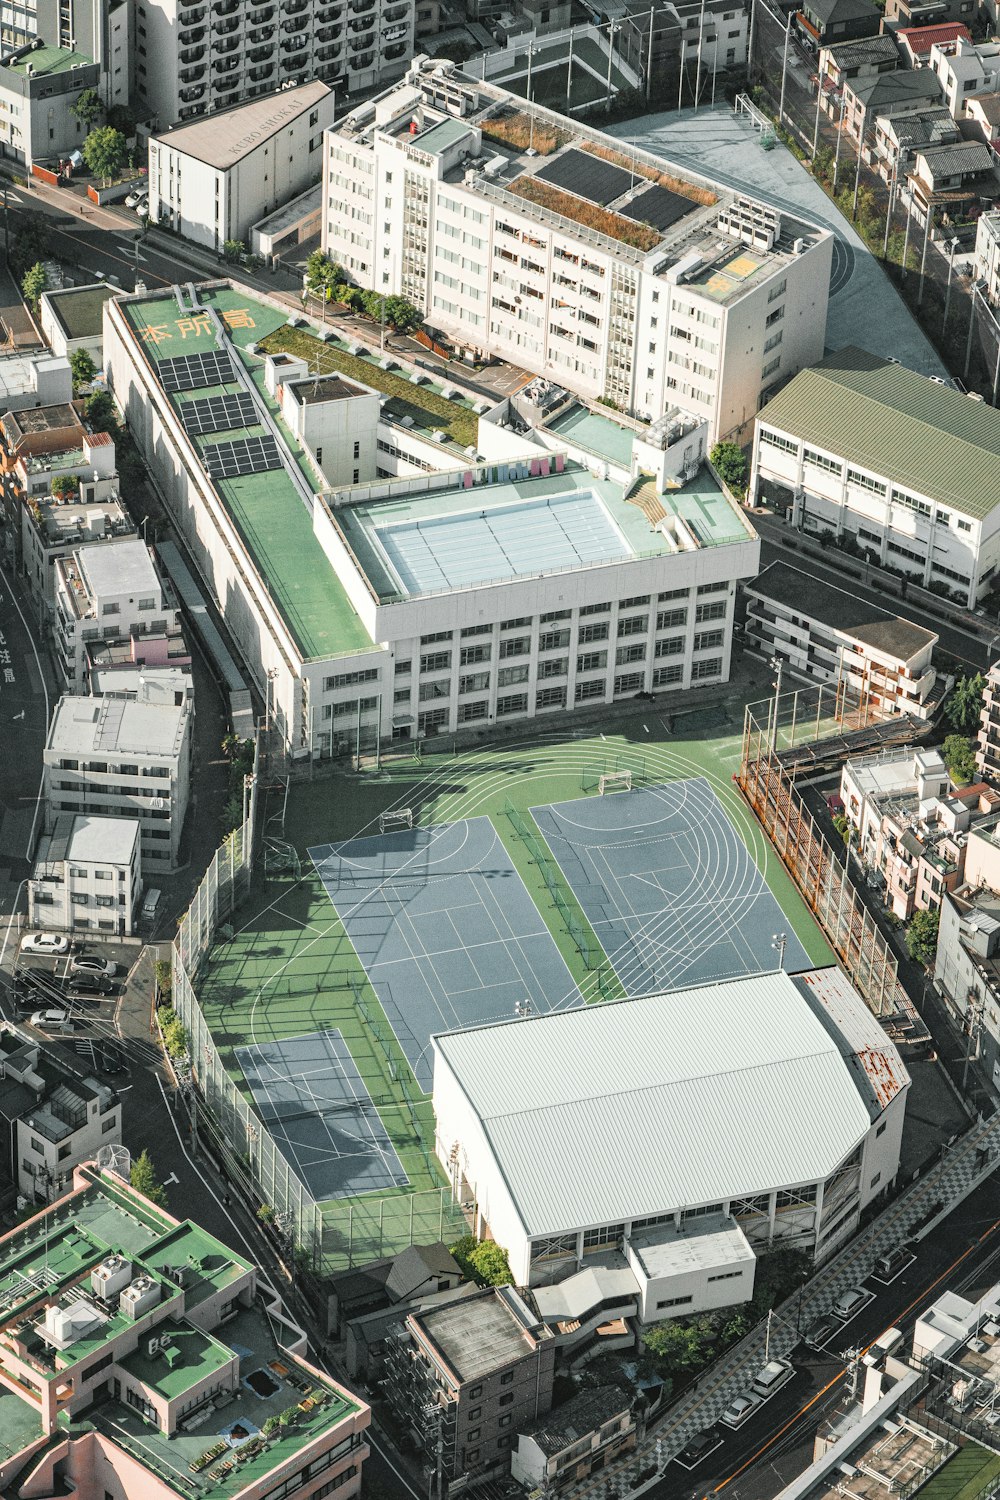 an aerial view of a tennis court in a city